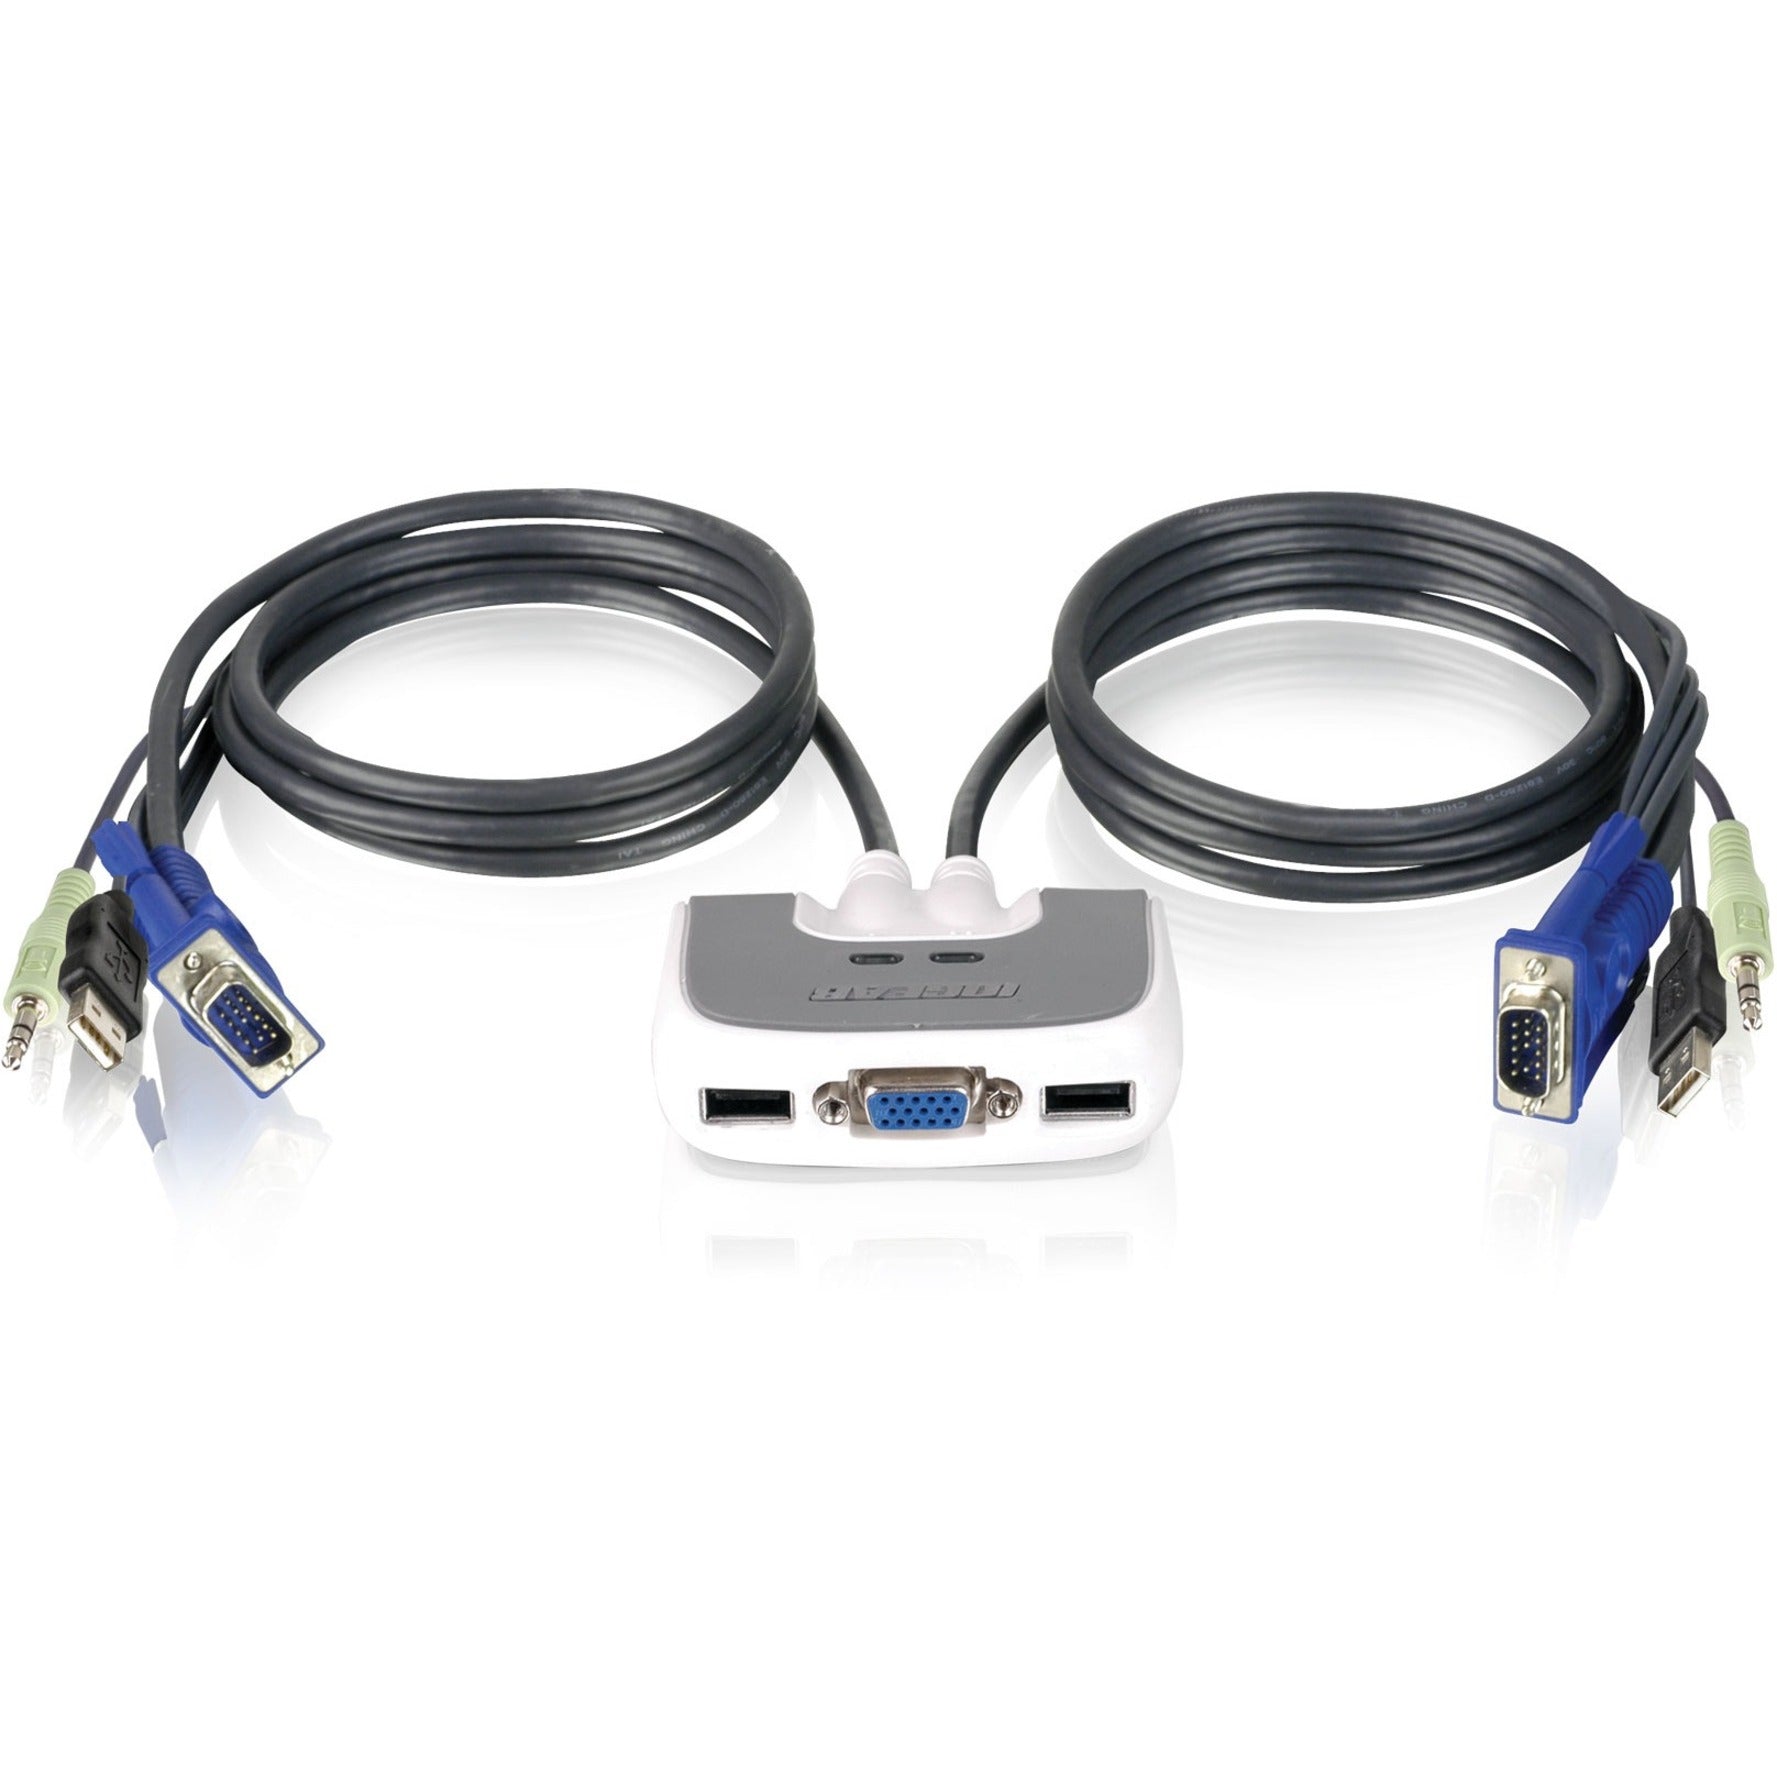 IOGEAR GCS632U MiniView Micro USB Plus 2-Port KVM Switch, Easy USB and VGA Switching for Multiple Computers